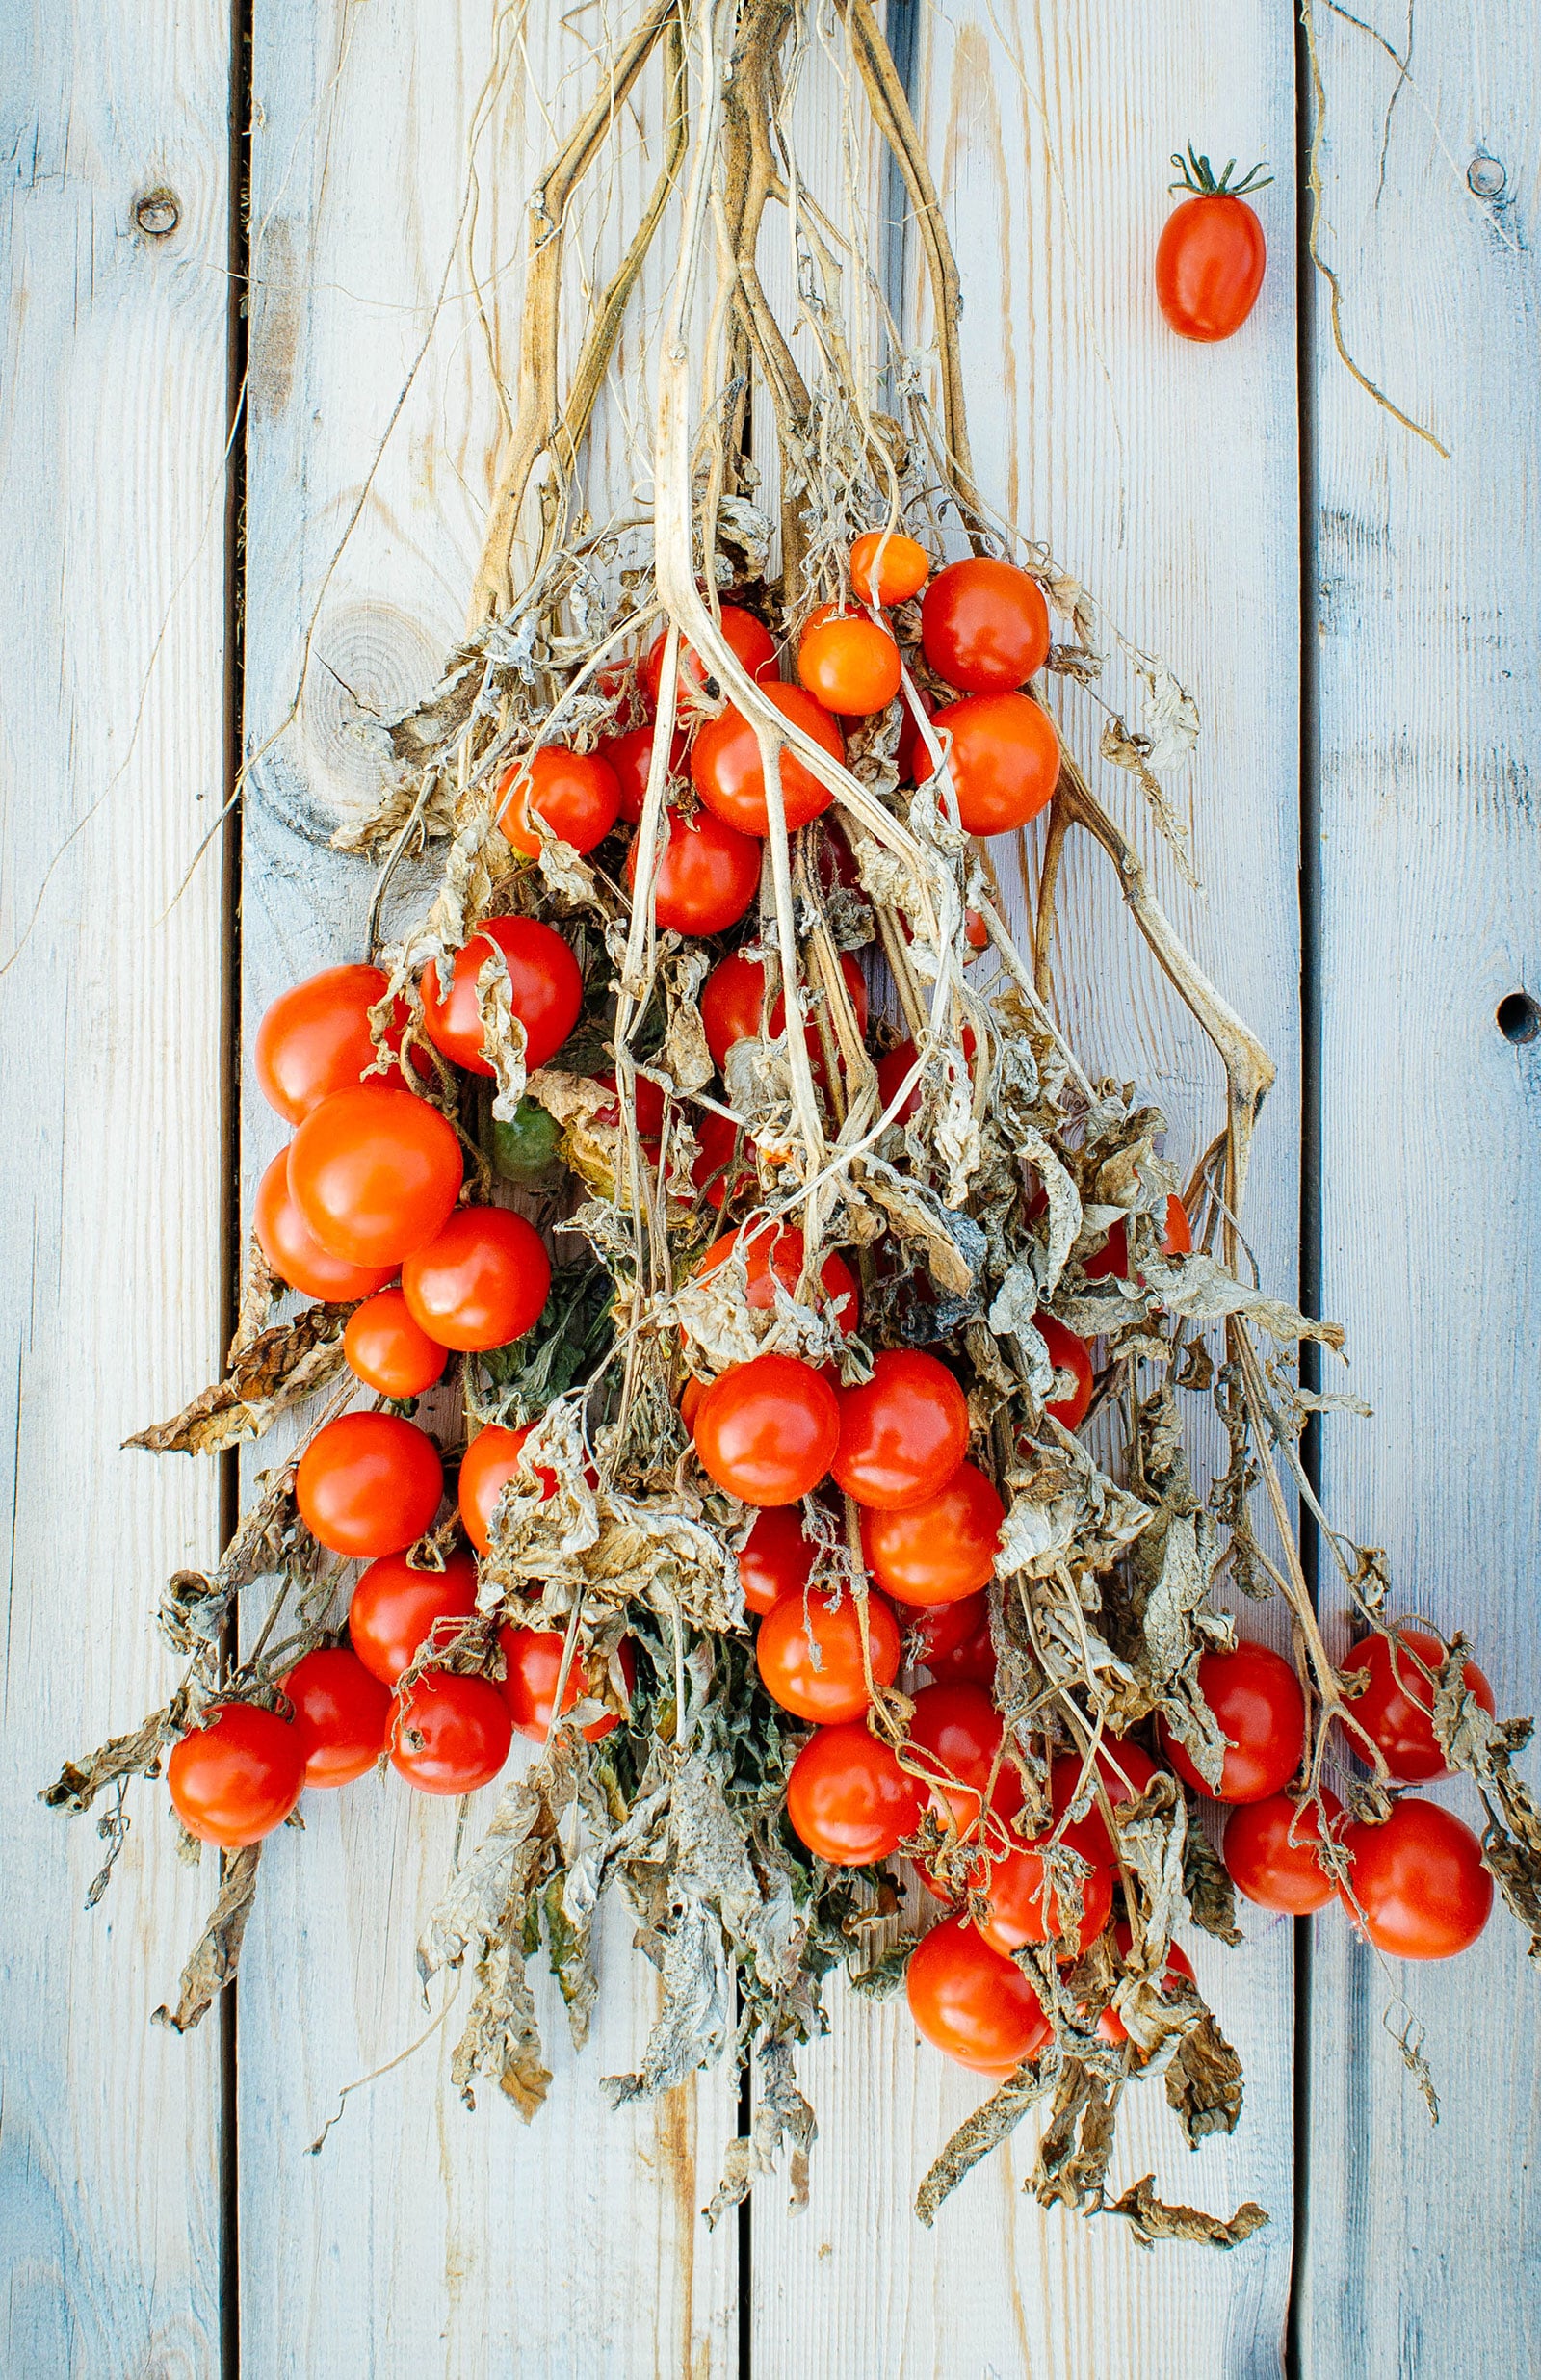 A section of tomato vines removed from the plant, with dried stems and leaves and clusters of ripe red cherry tomatoes still hanging on